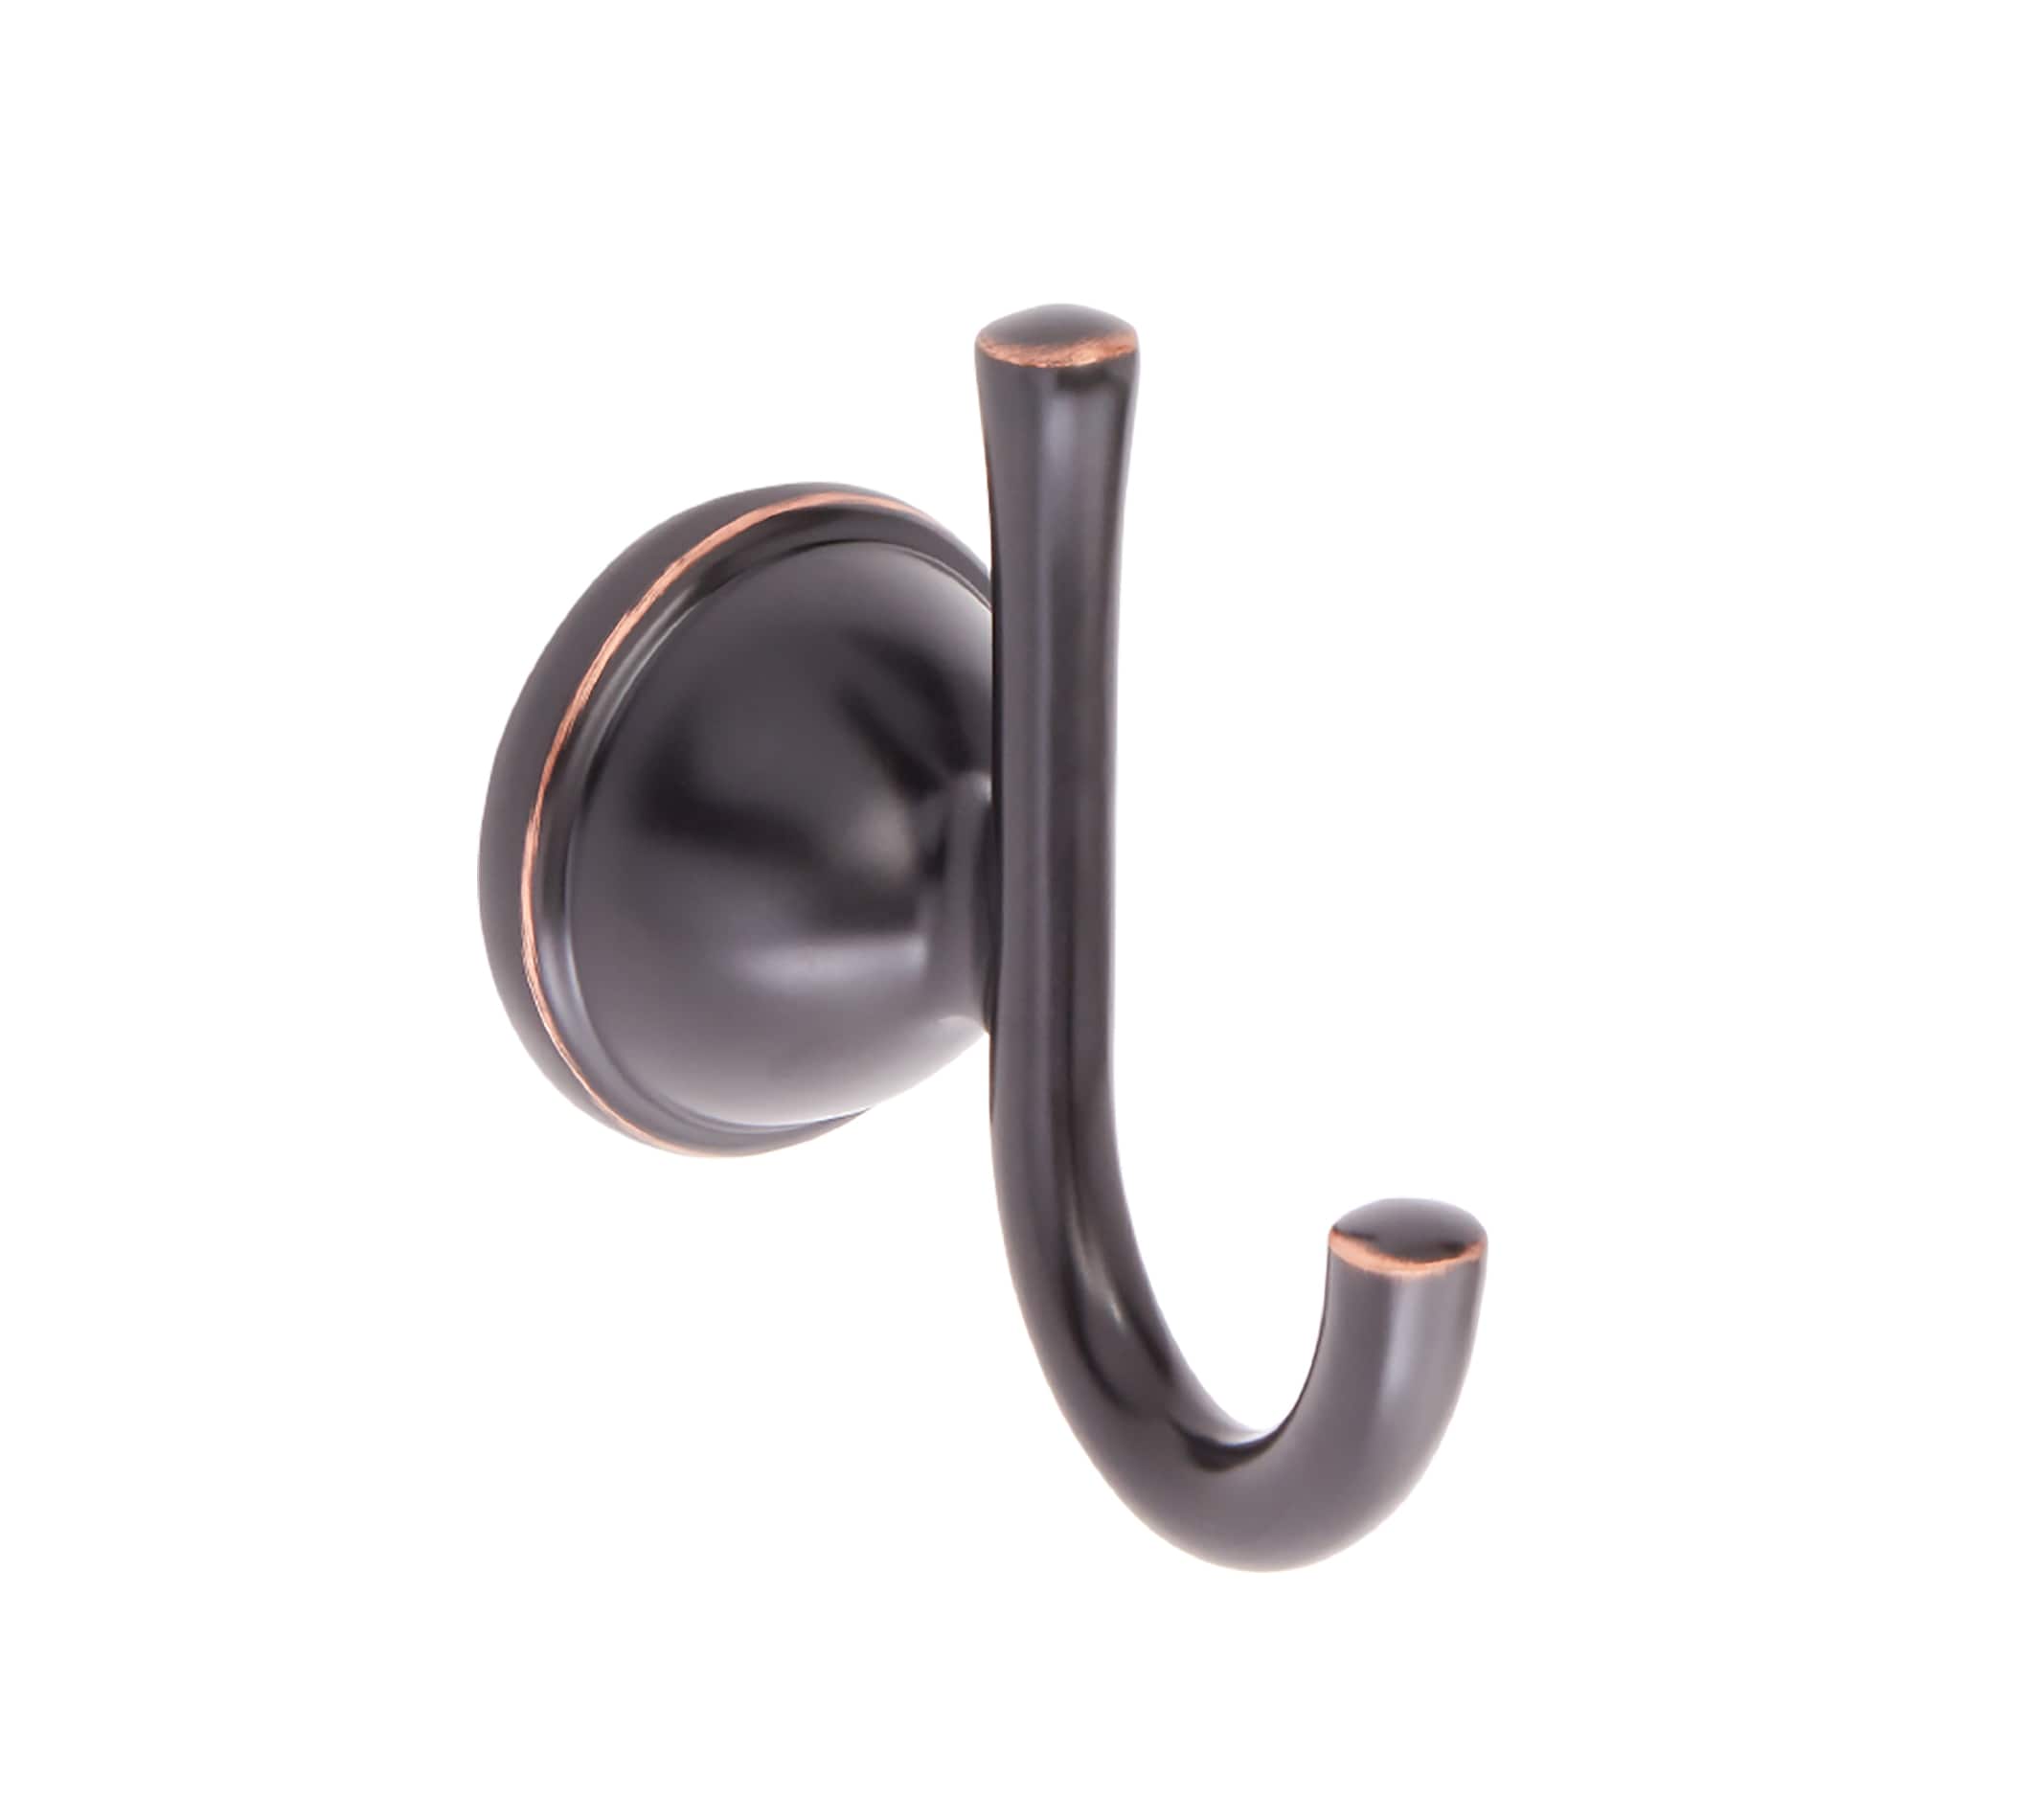 National Hardware N330-795 Single Clothes Hook Oil Rubbed Bronze 2 Pack